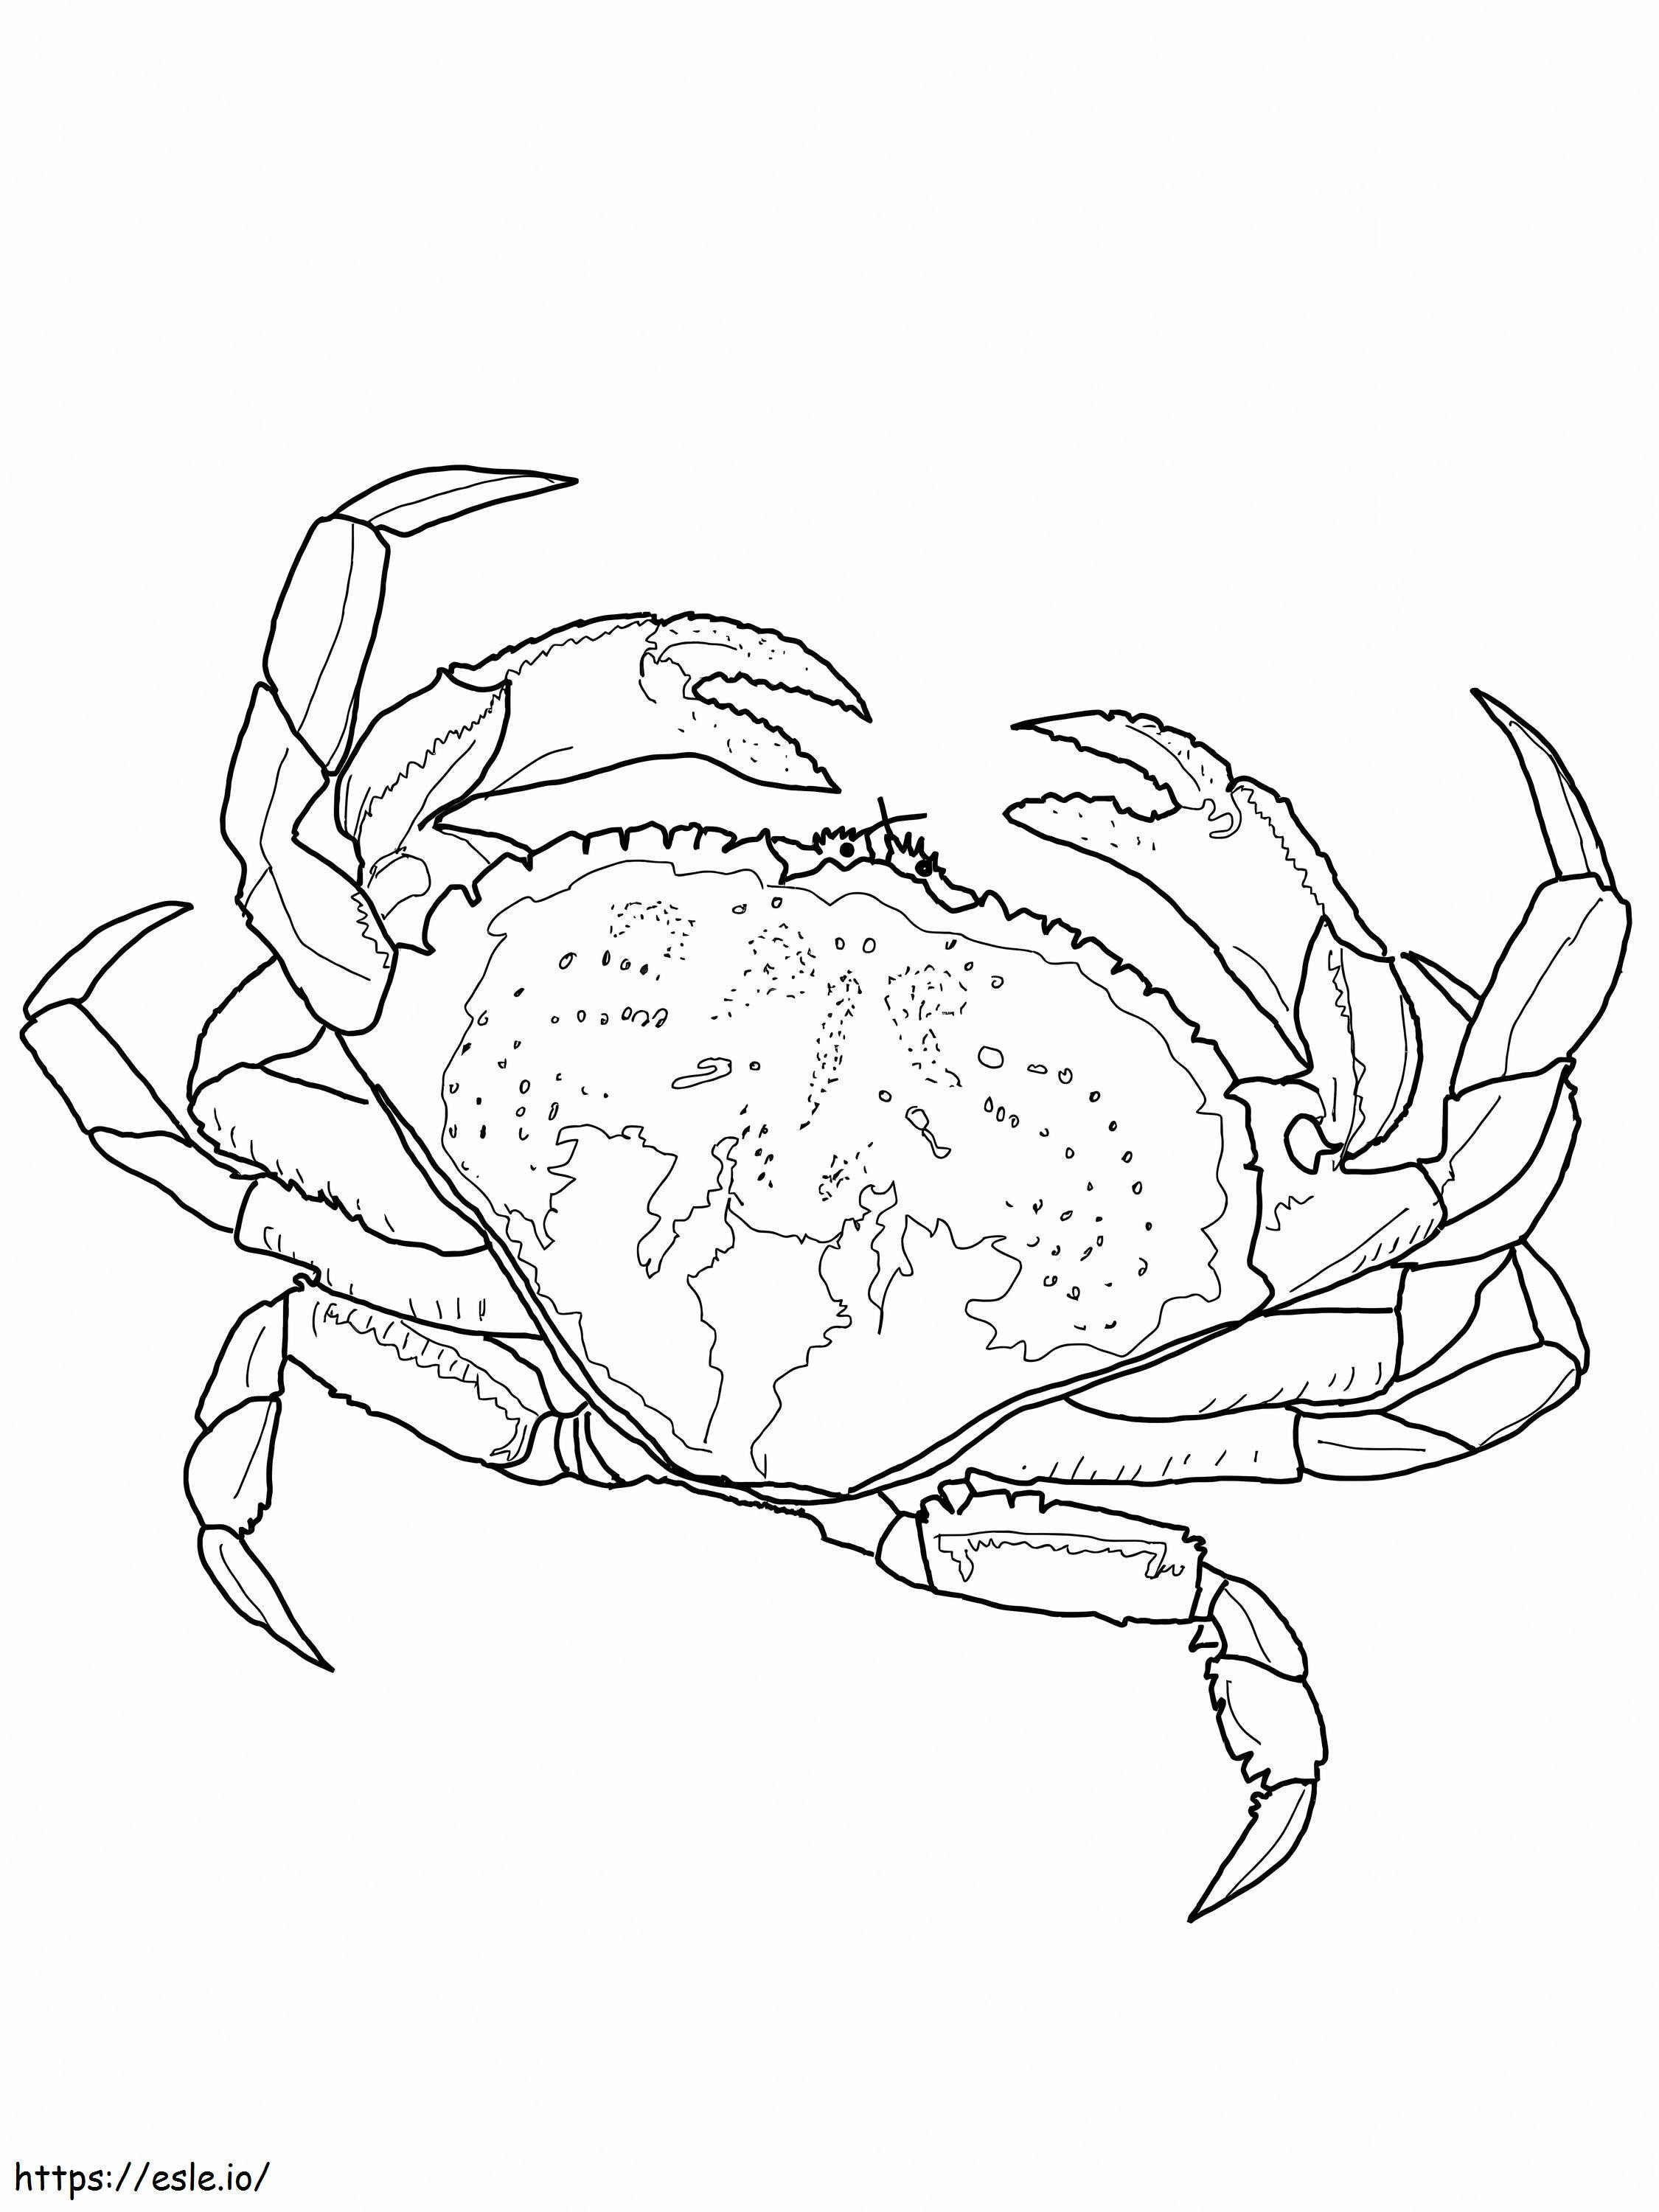 Awesome Crab coloring page